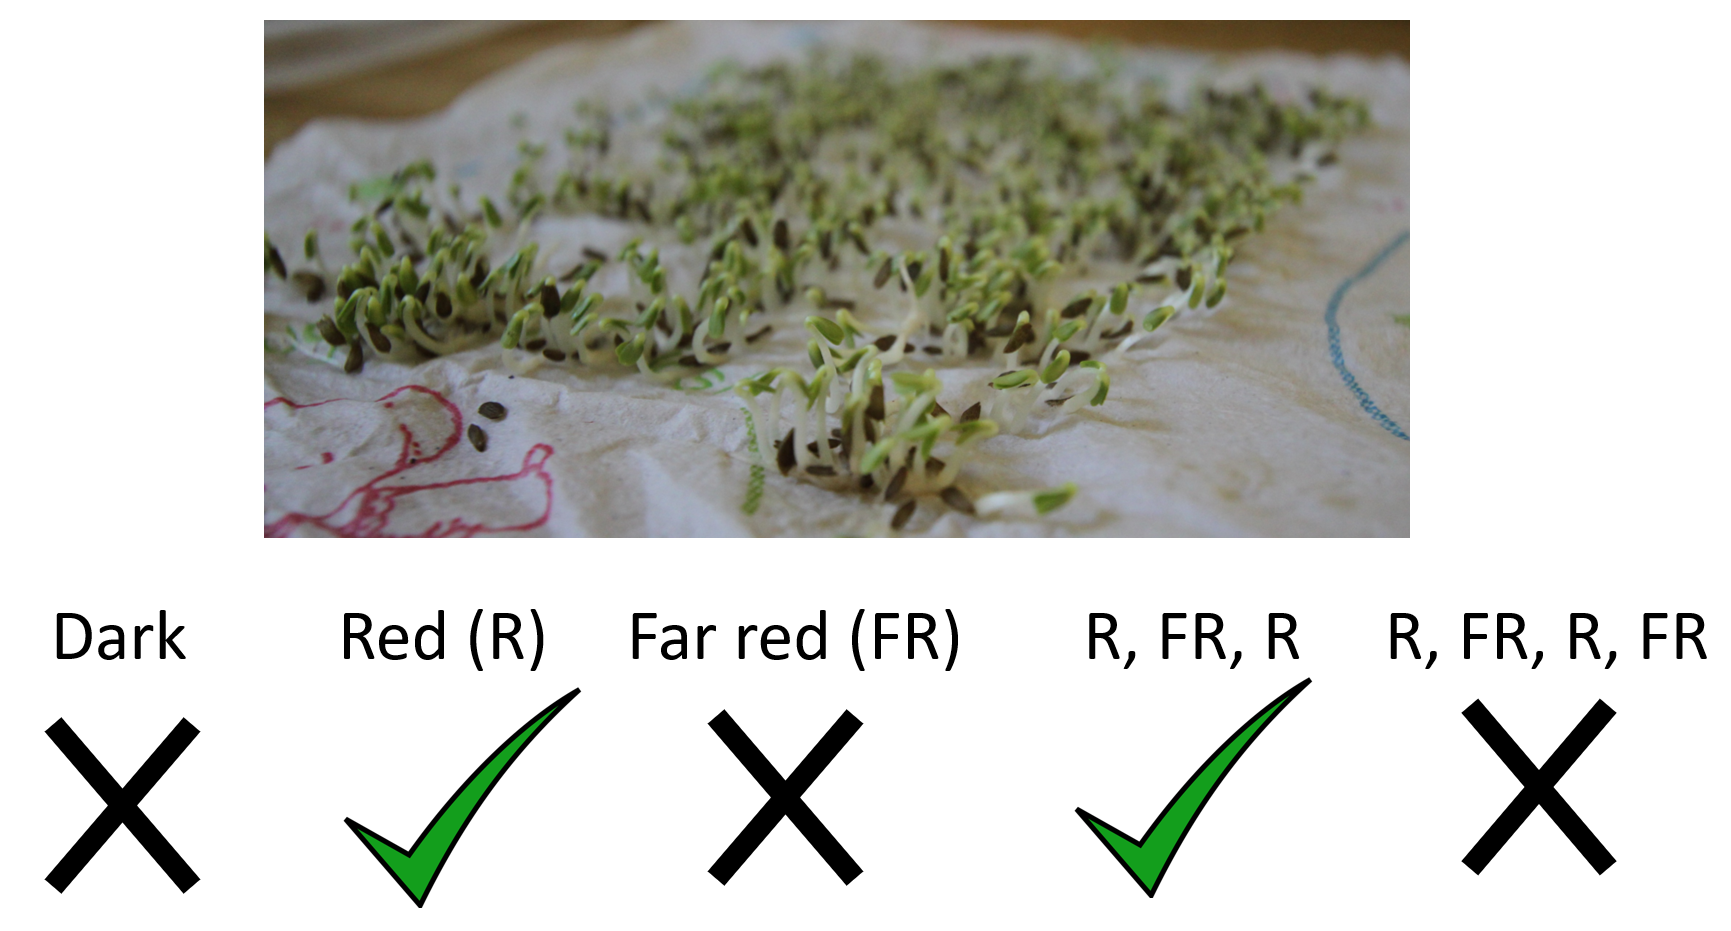 The role of light in regulating seed dormancy and germination